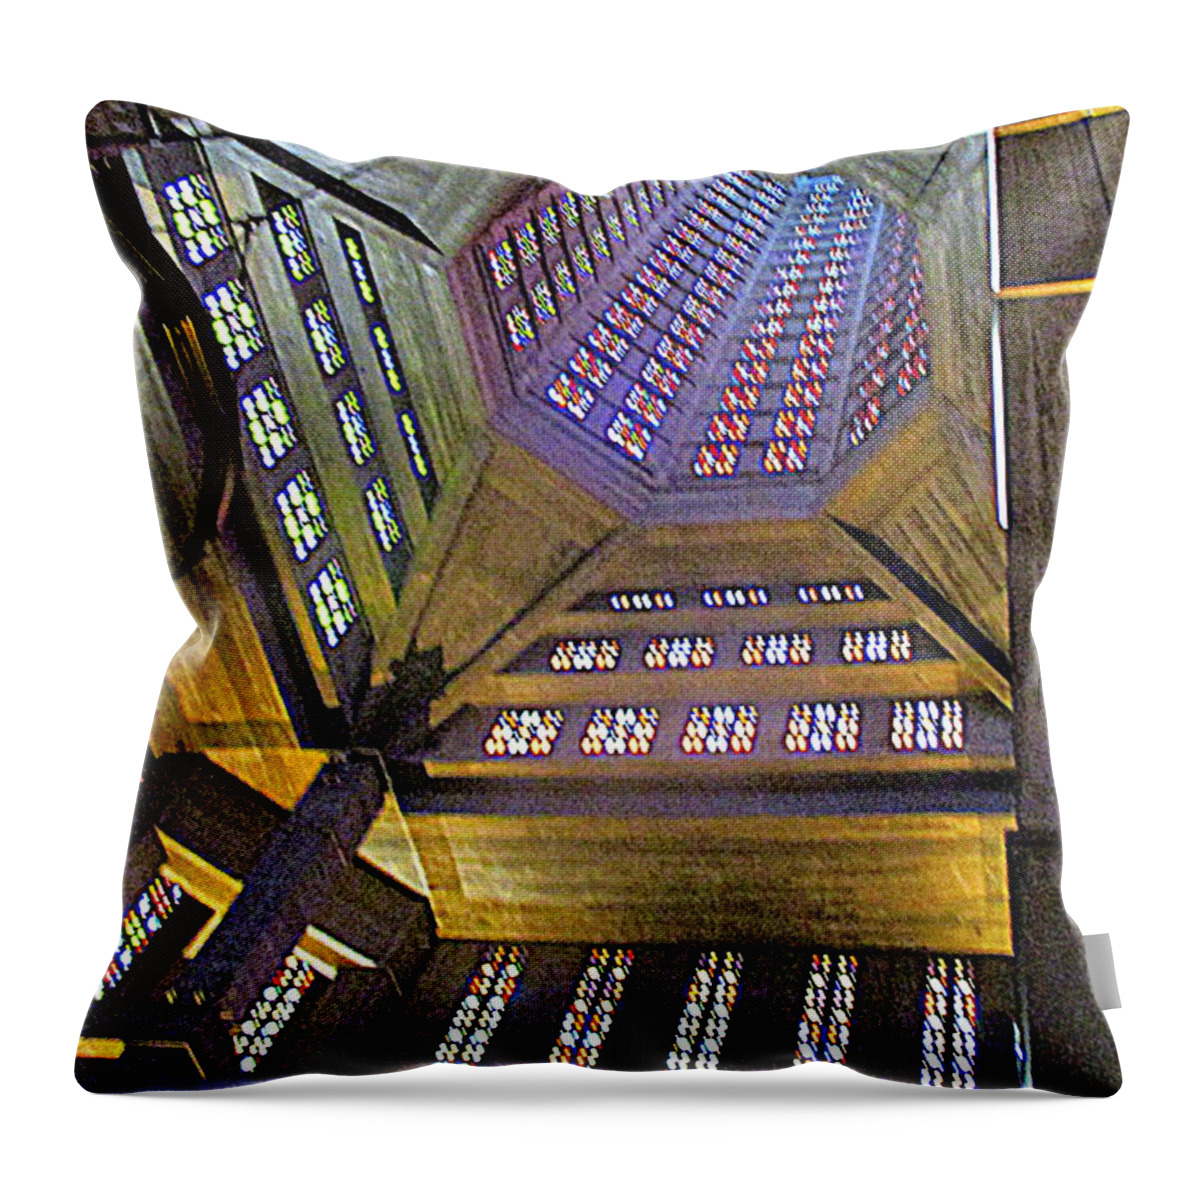 Le Havre Throw Pillow featuring the photograph St Joseph 10 by Randall Weidner